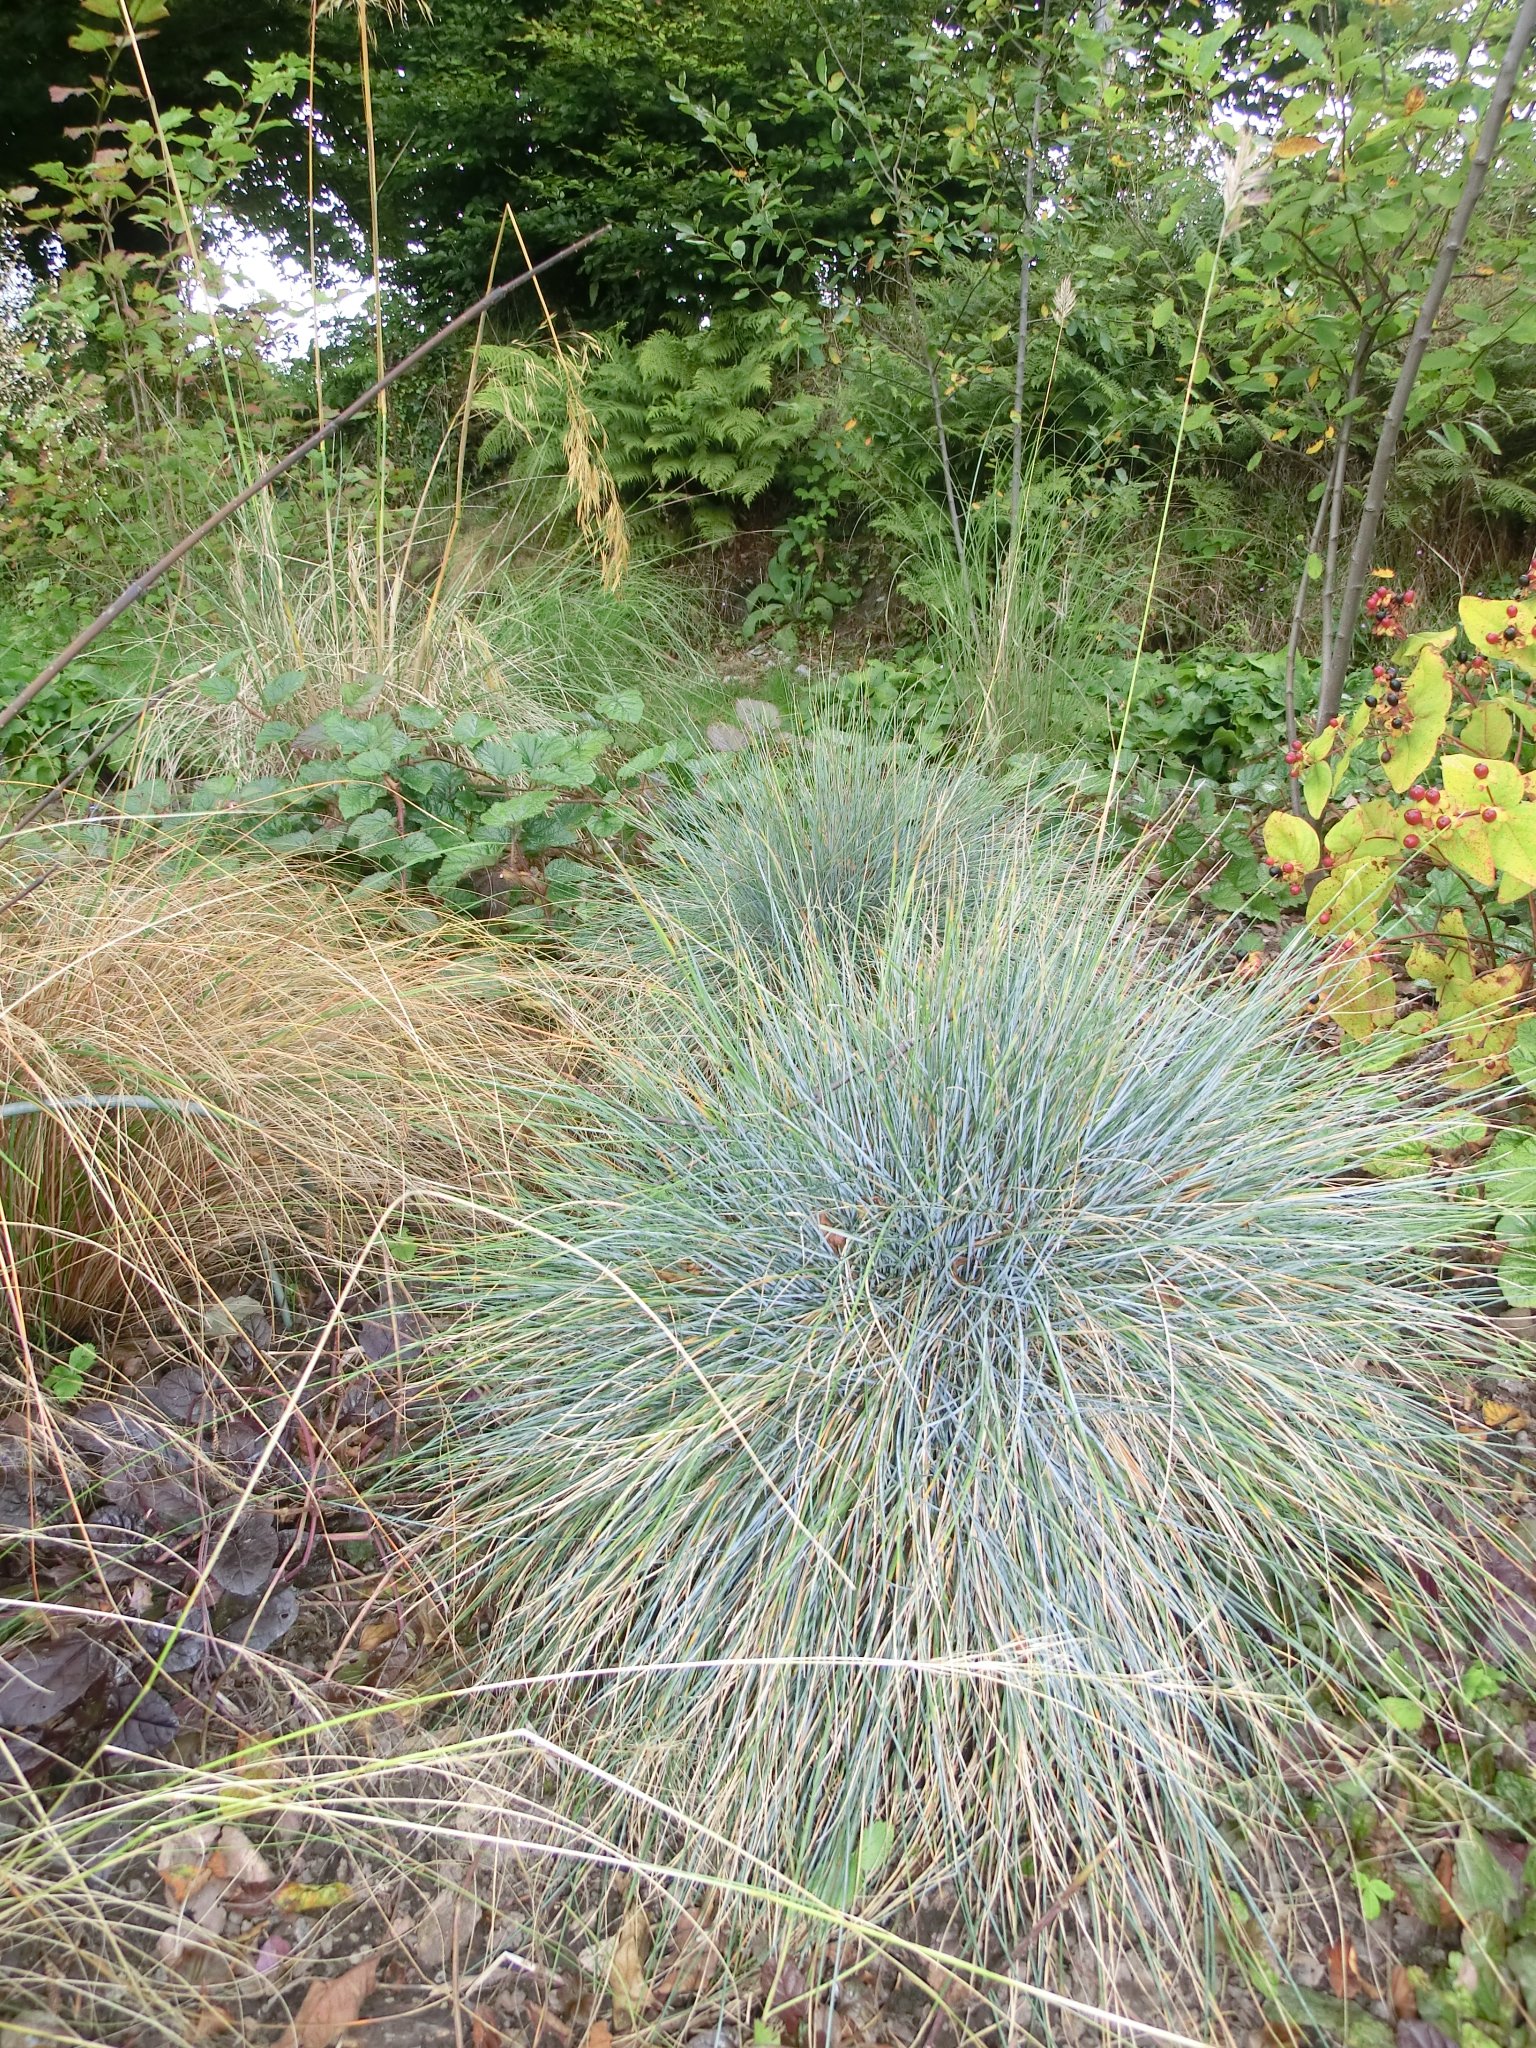 Ornamental grasses – early to mid spring is time to tidy up